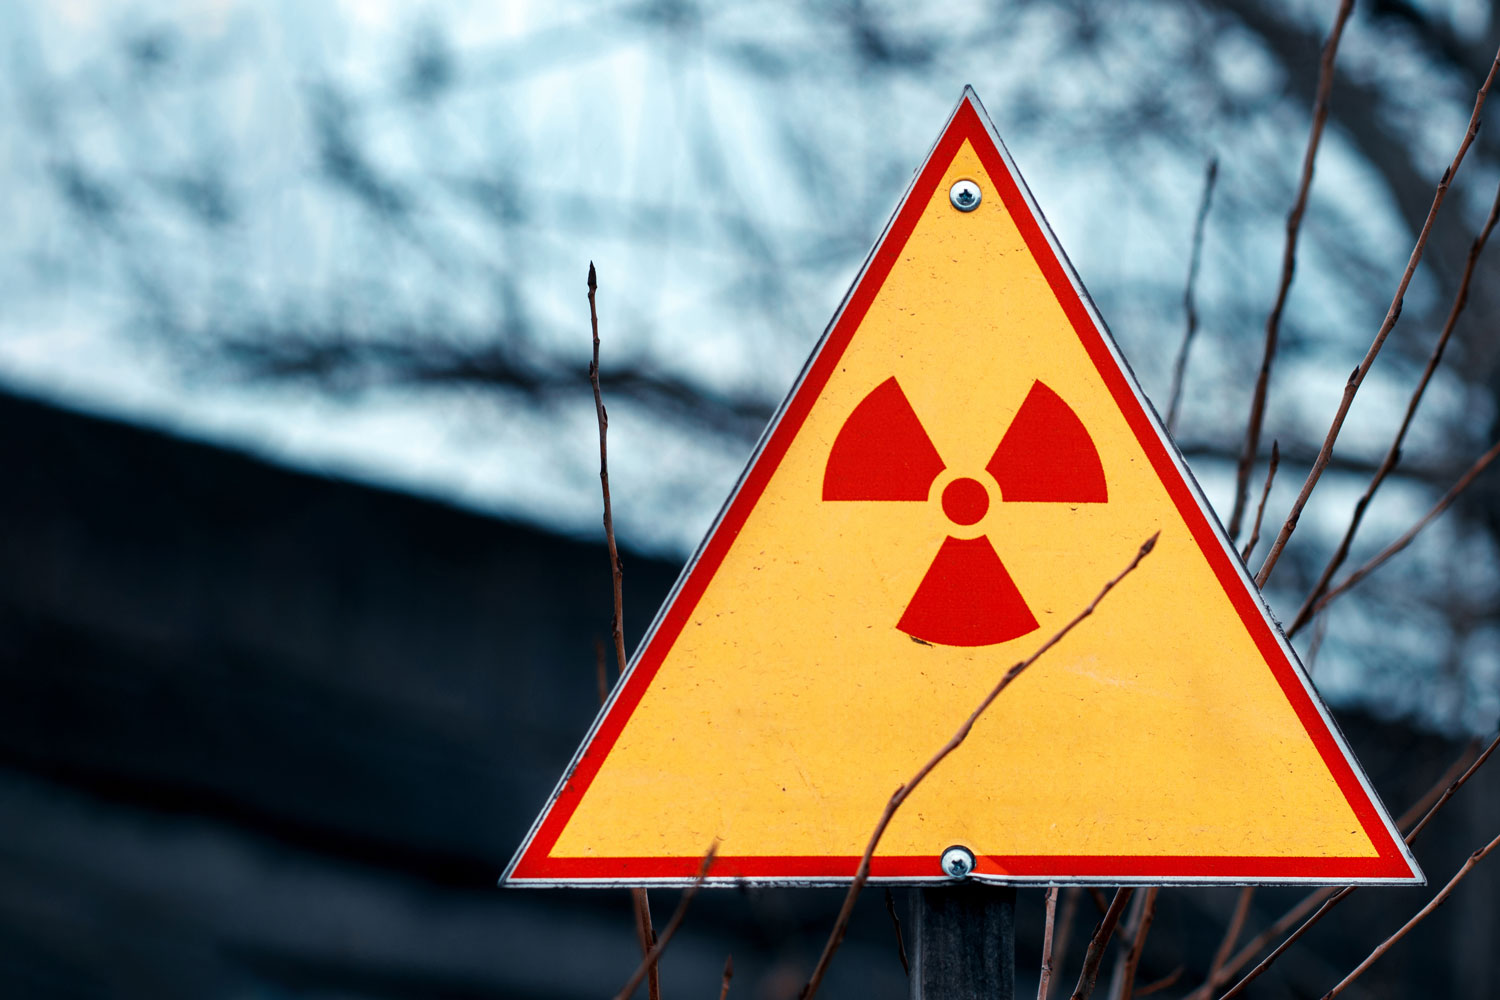 radiation poisoning effects on human